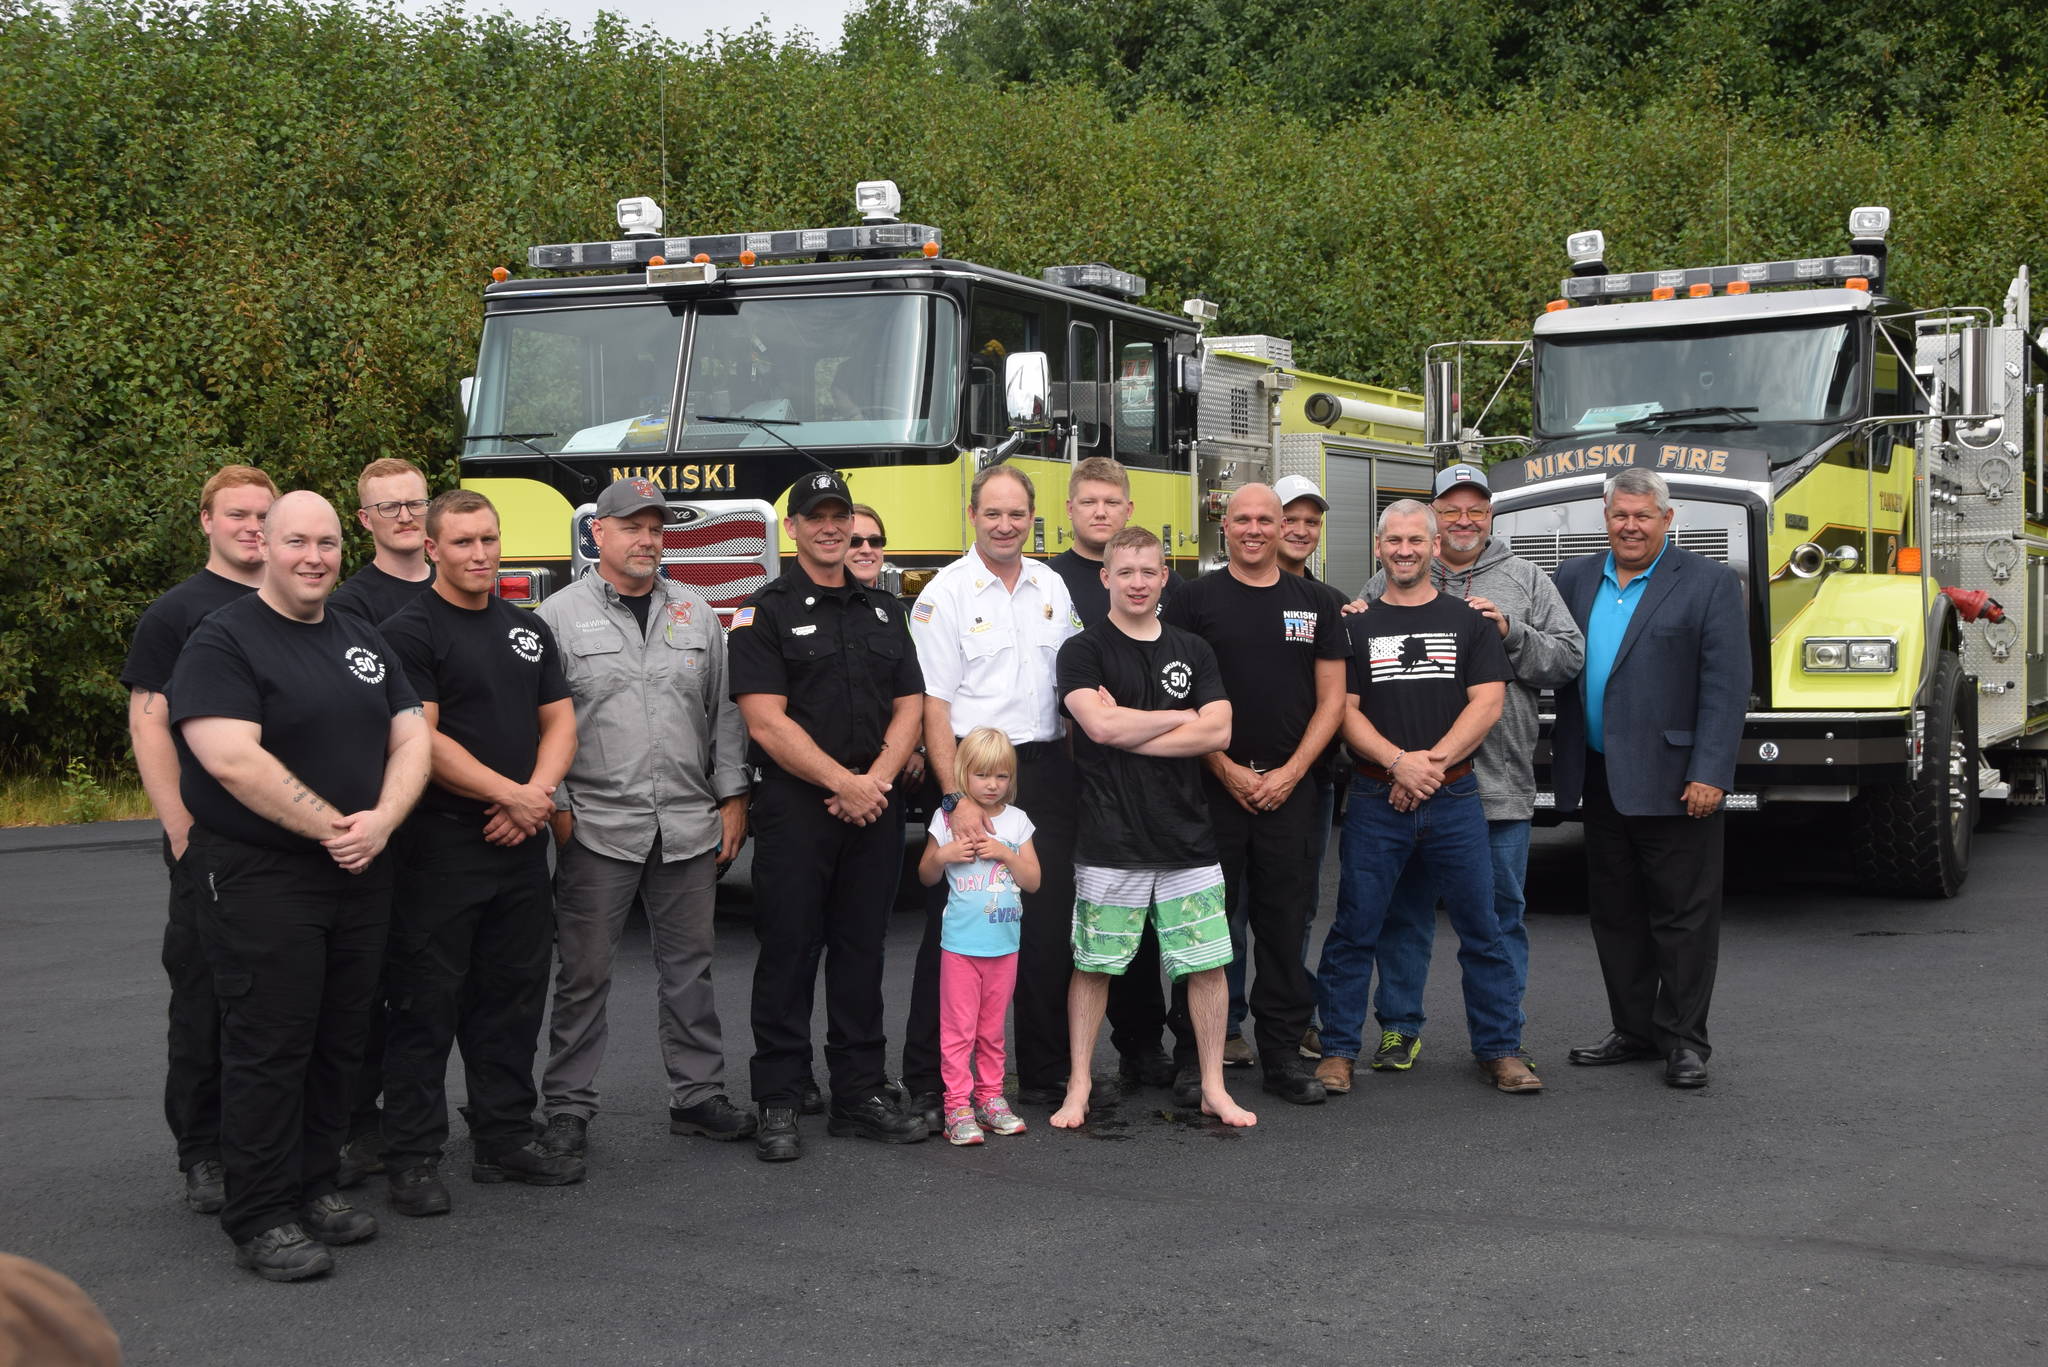 Current and former personnel for the Nikiski Fire Department smile for the camera at Fire Station #2 during the department’s 50th anniversary celebration in Nikiski, Alaska on July 15, 2019. (Photo by Brian Mazurek/Peninsula Clarion)